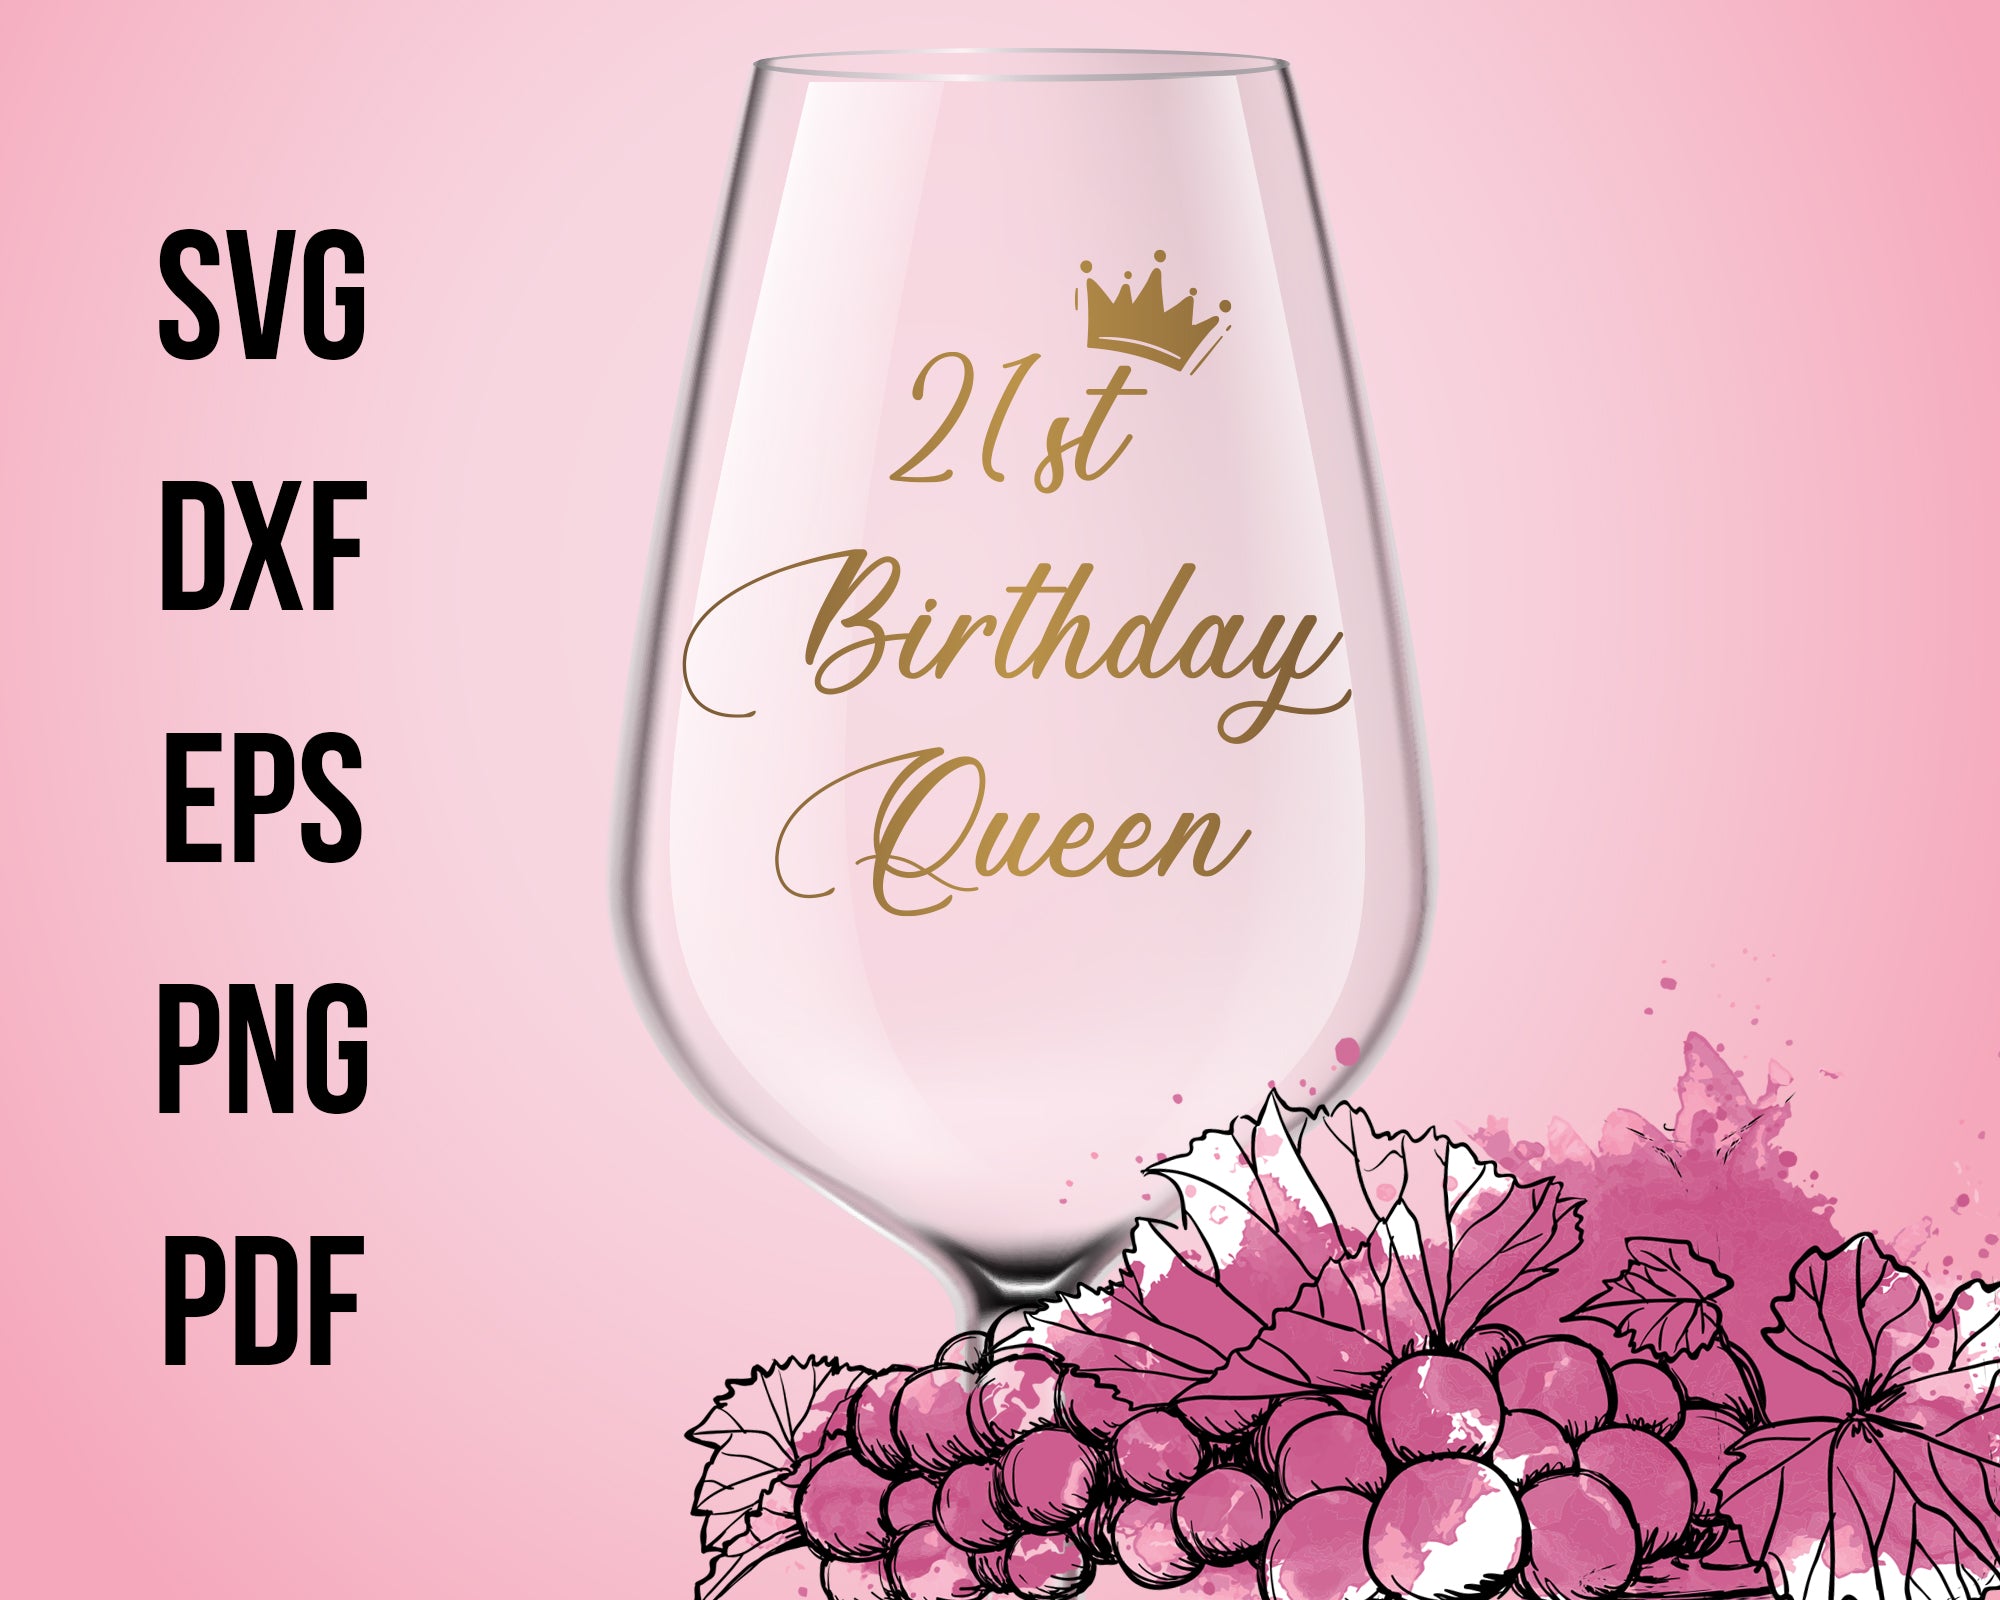 21st Birthday Queen Wine Glasses Cut File For Cricut SVG, DXF, PNG, EPS, PDF Silhouette Printable Files